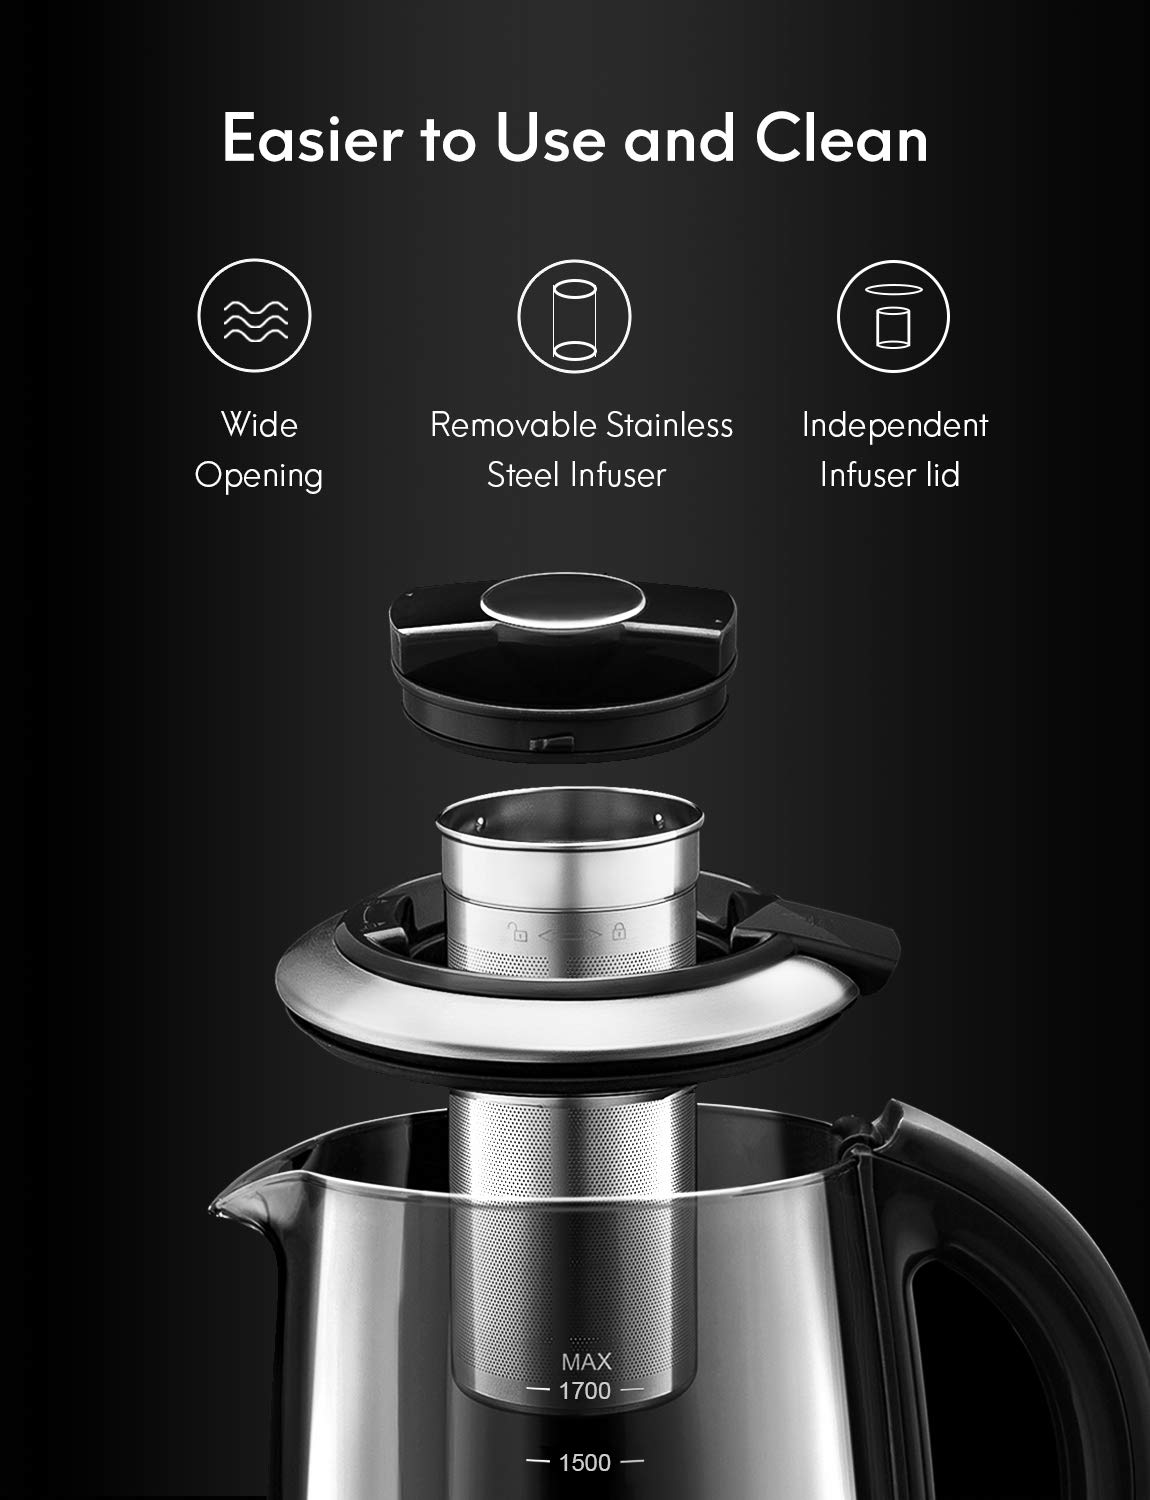 1.7L Electric Kettle Temperature Control & Tea Infuser with